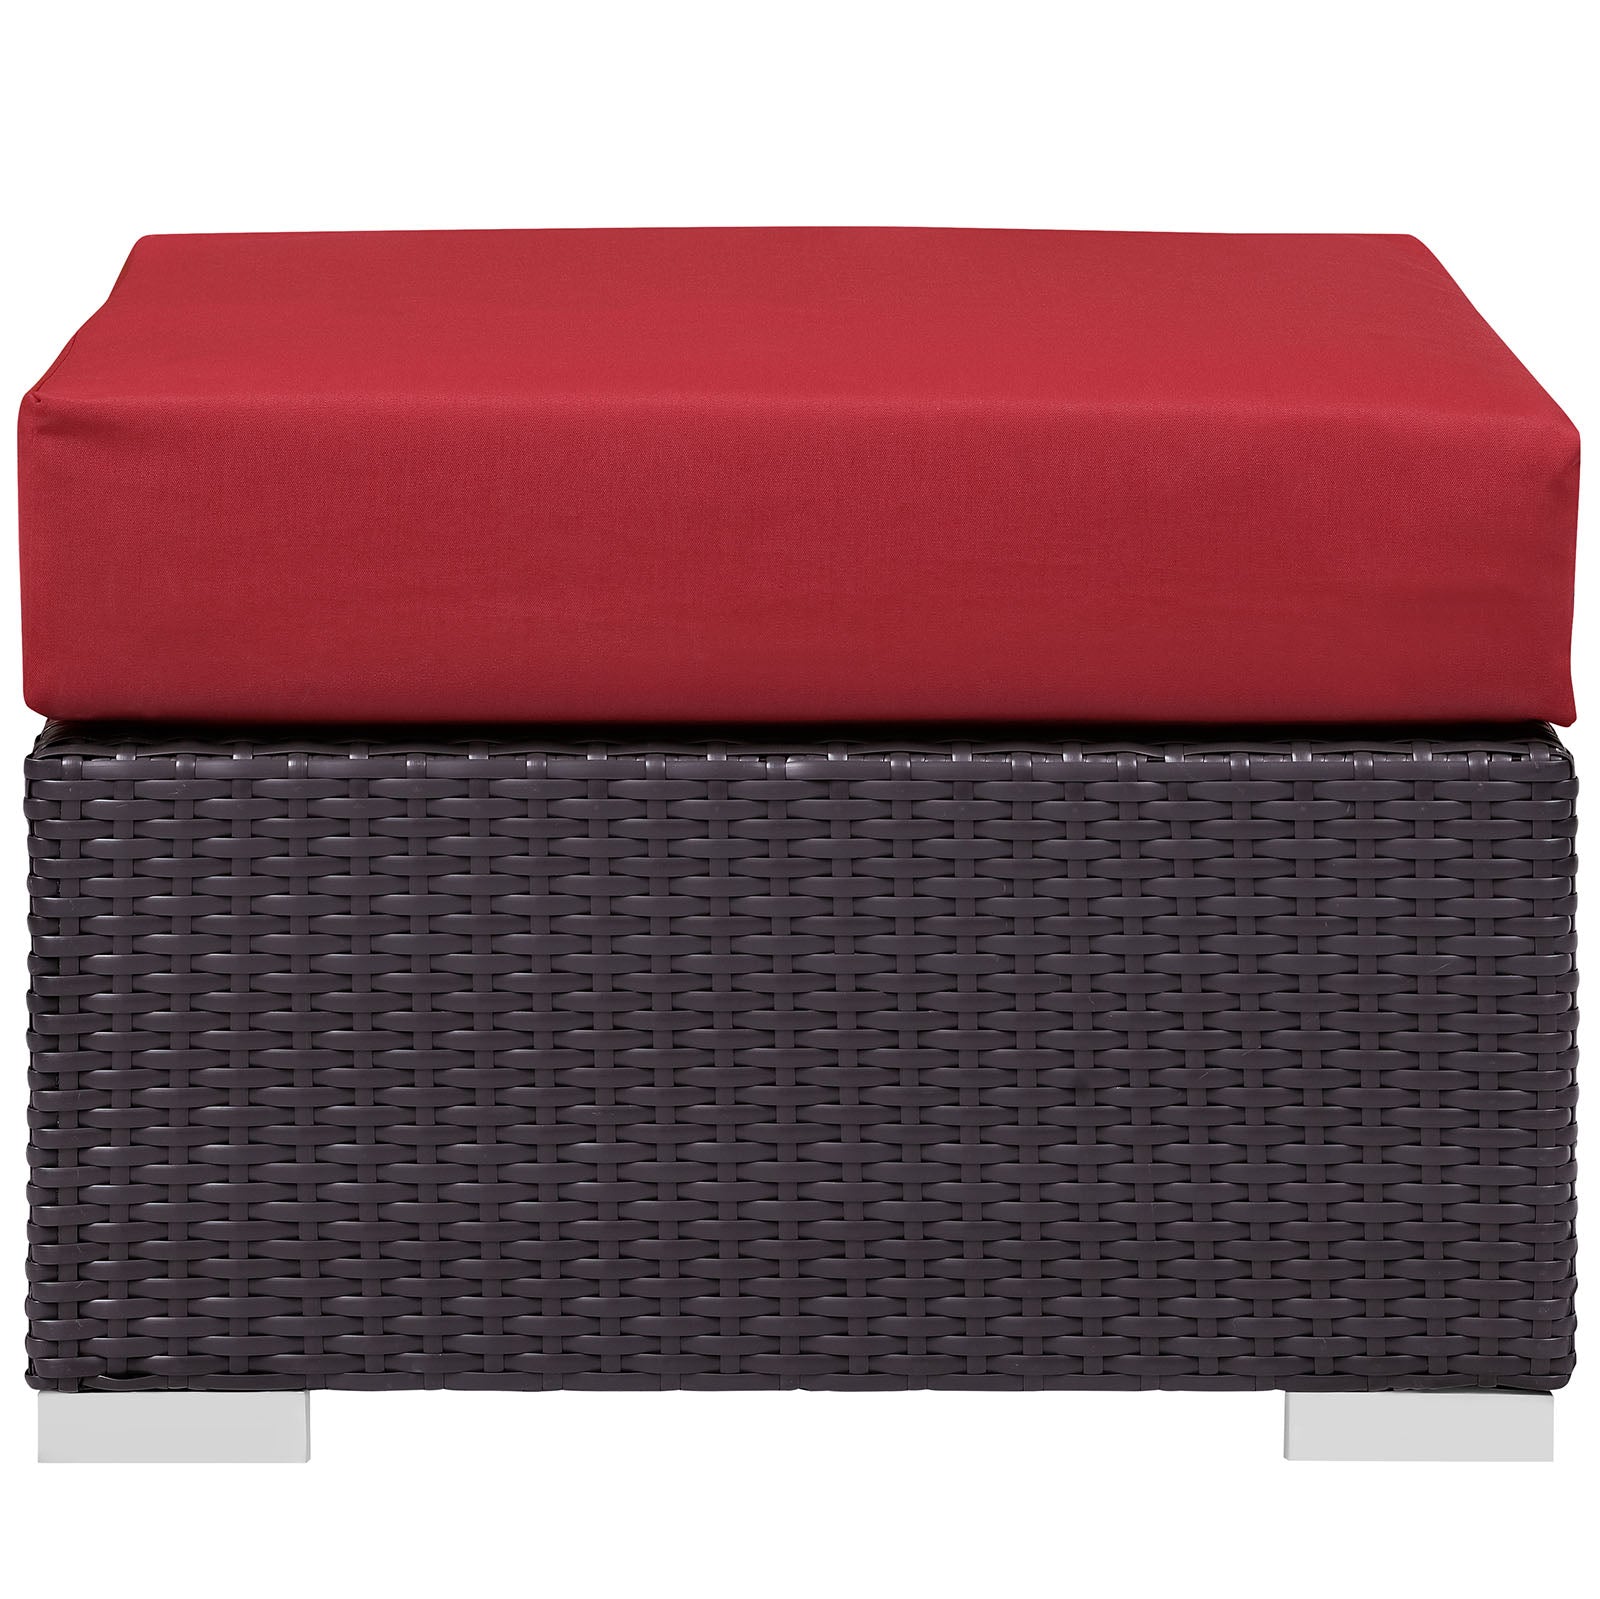 Modway Outdoor Stools & Benches - Convene Outdoor Patio Fabric Square Ottoman Espresso Red